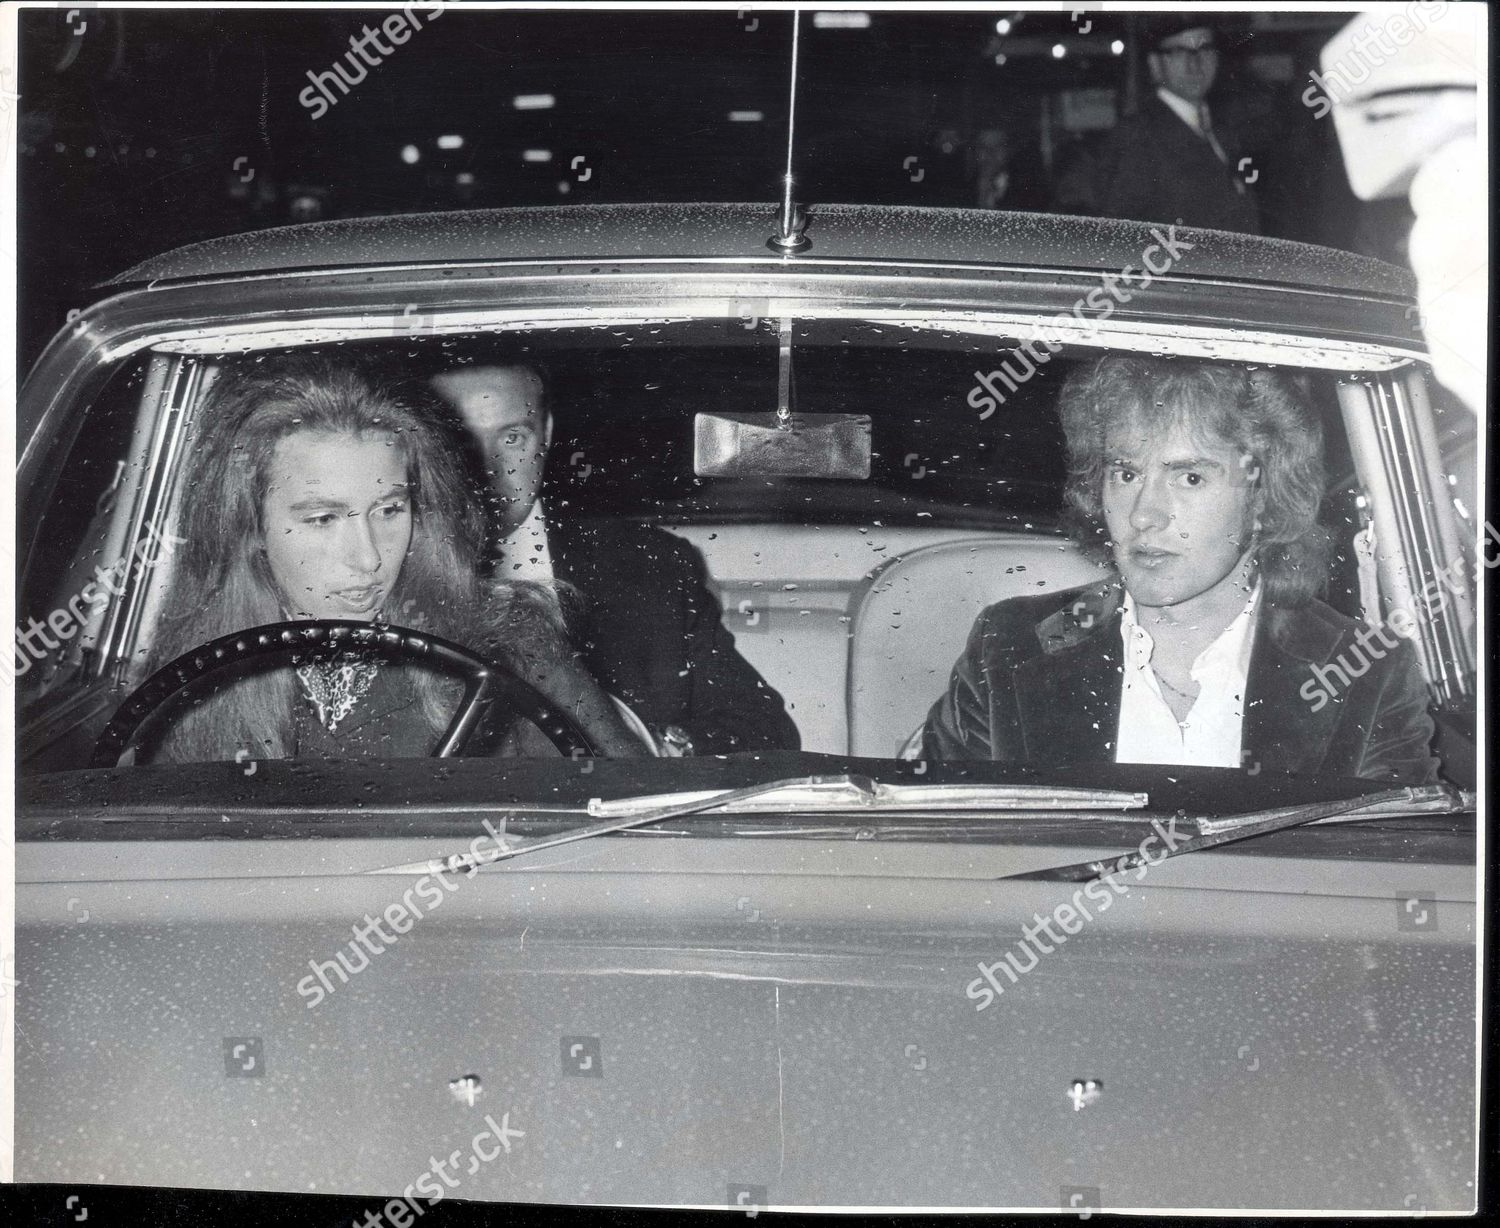 princess-anne-now-princess-royal-1970-picture-shows-princess-anne-leaving-the-wyndham-theatre-with-polo-player-sandy-harper-shutterstock-editorial-896289a.jpg